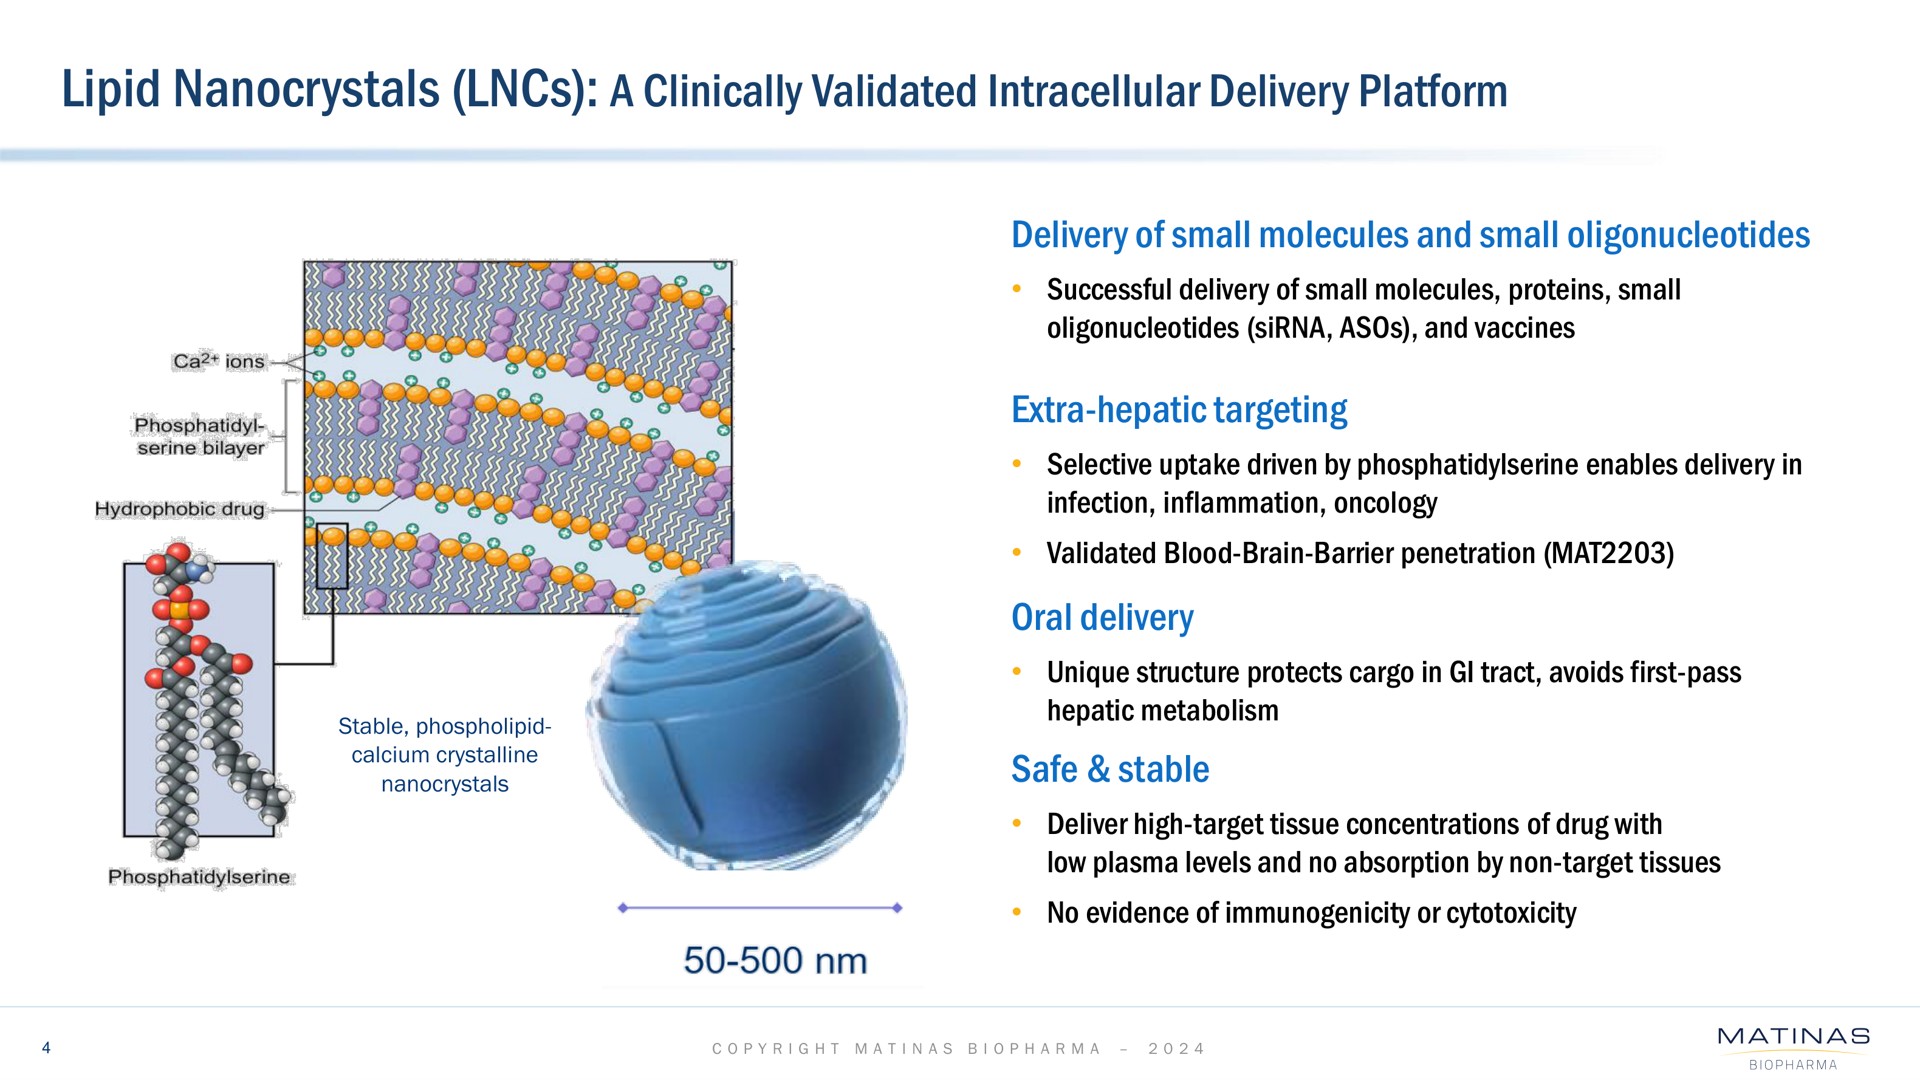 a clinically validated intracellular delivery platform me ion | Matinas BioPharma